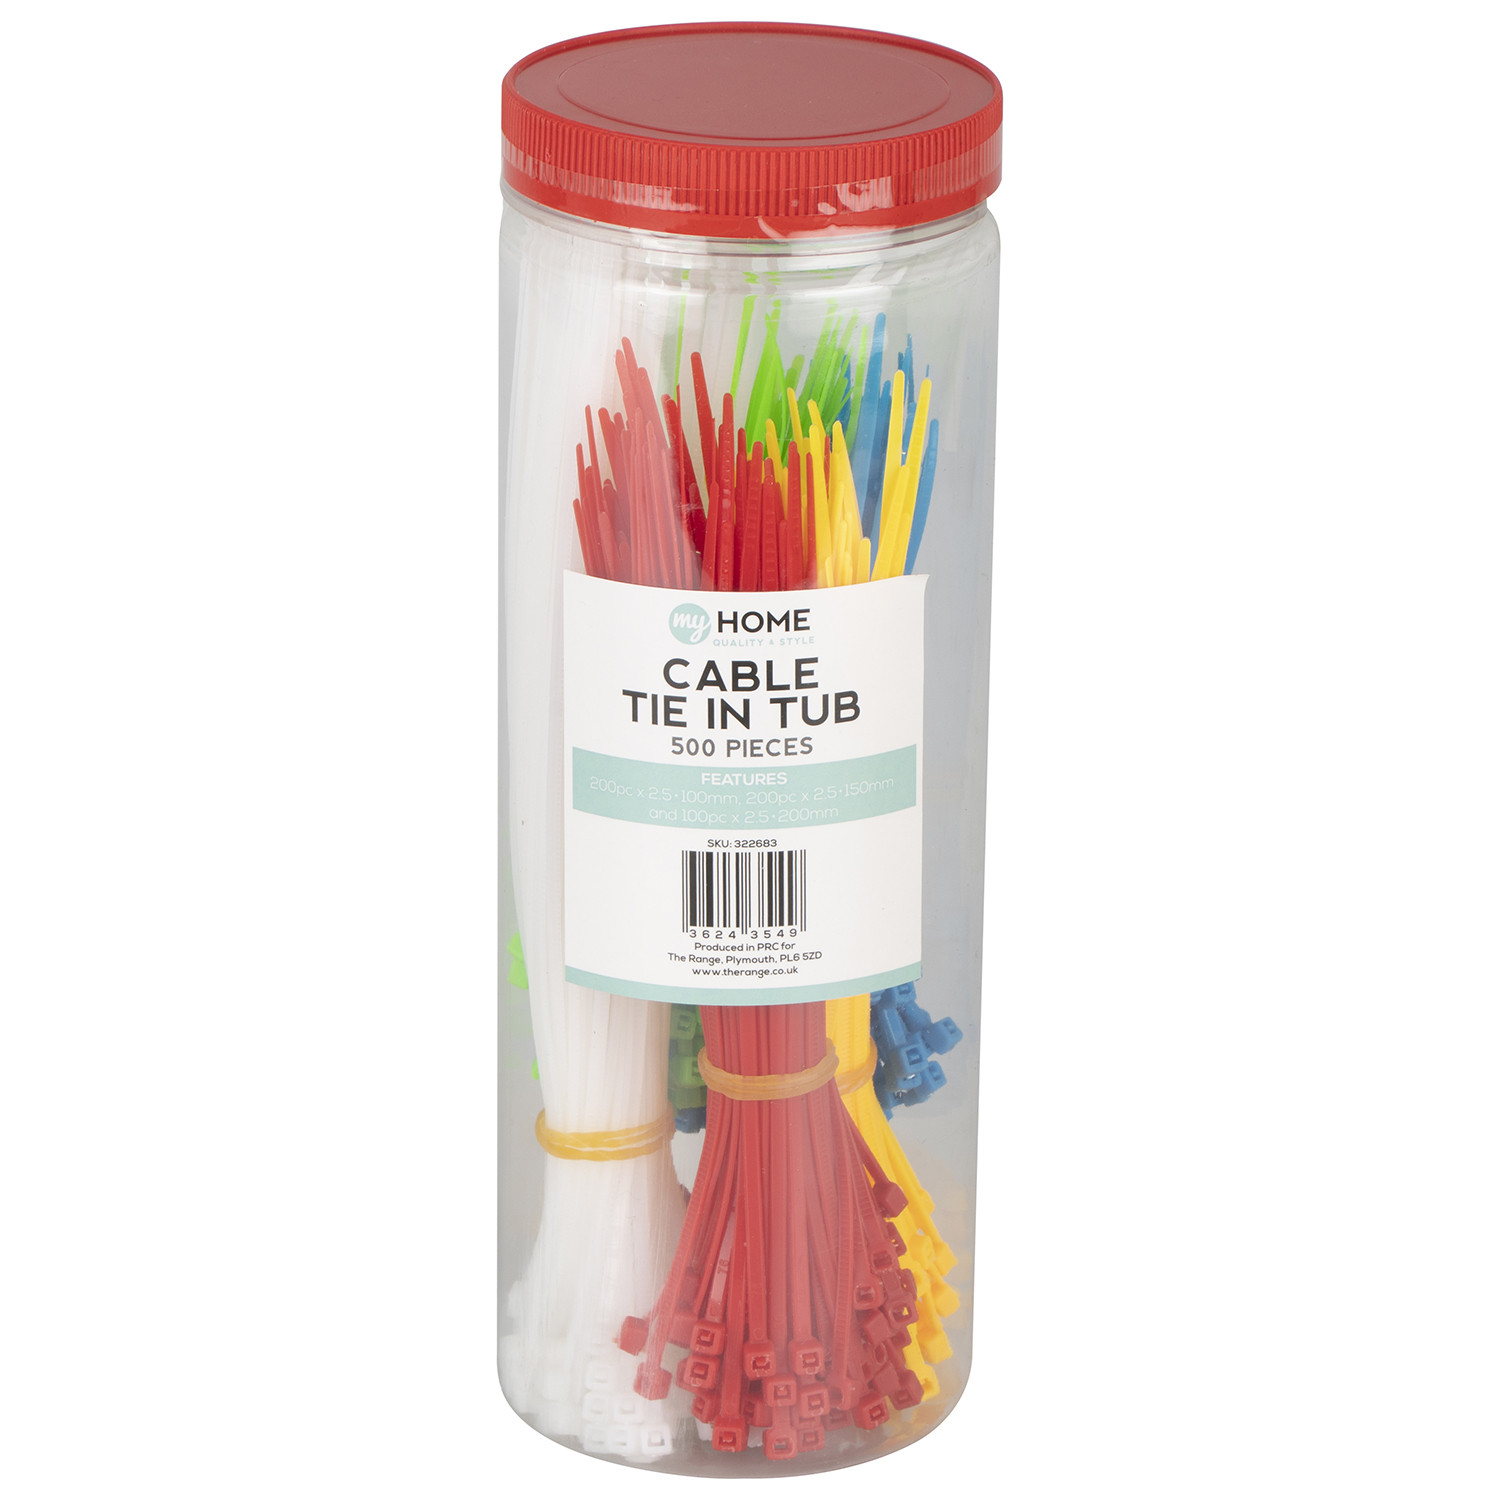 My Home Mixed Colours Cable Tie in Tub 500 Pack Image